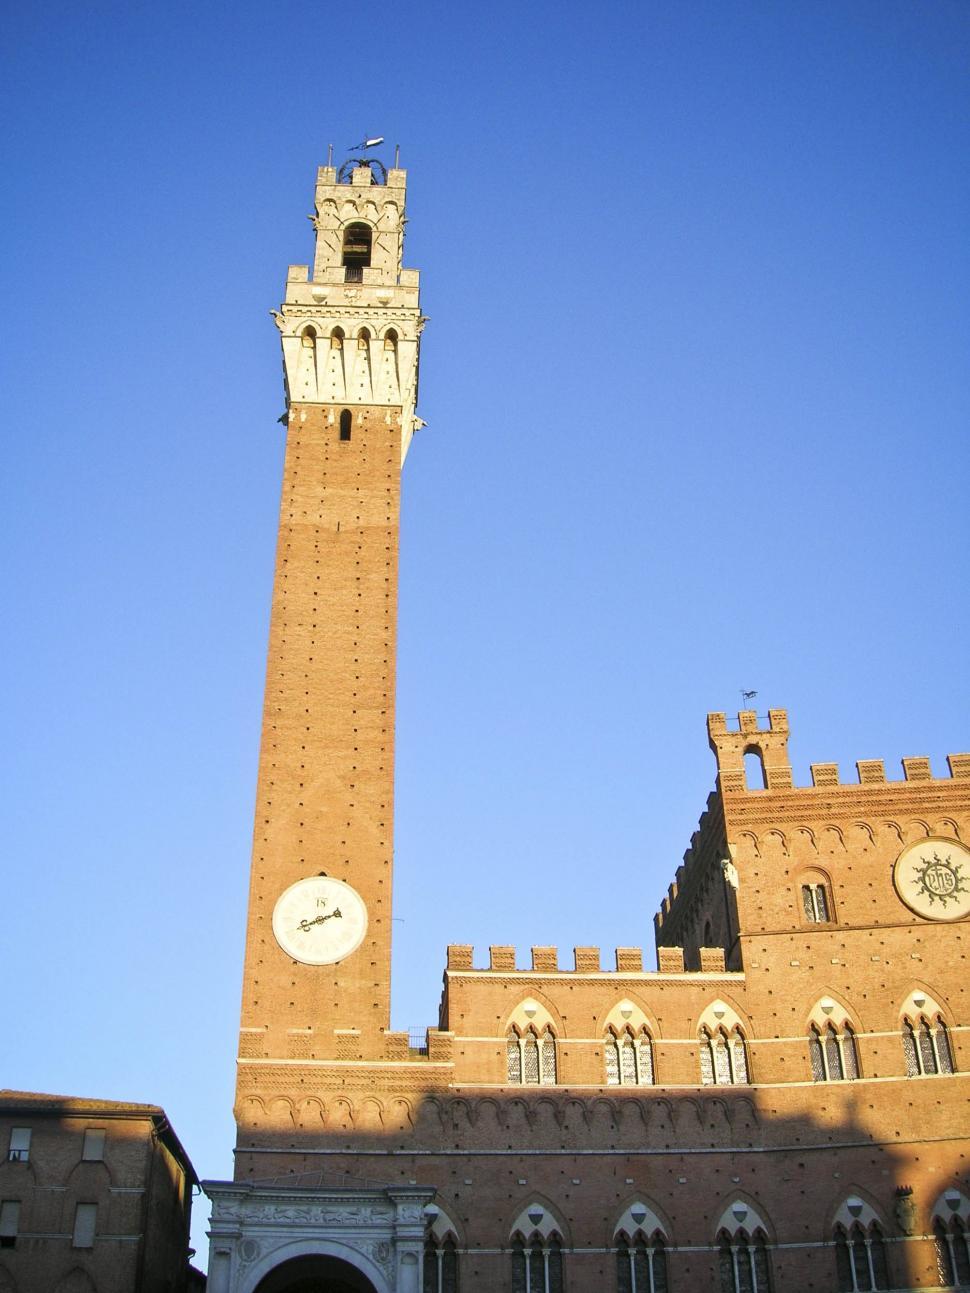 Free Image of Clock tower in Siena, Italy 